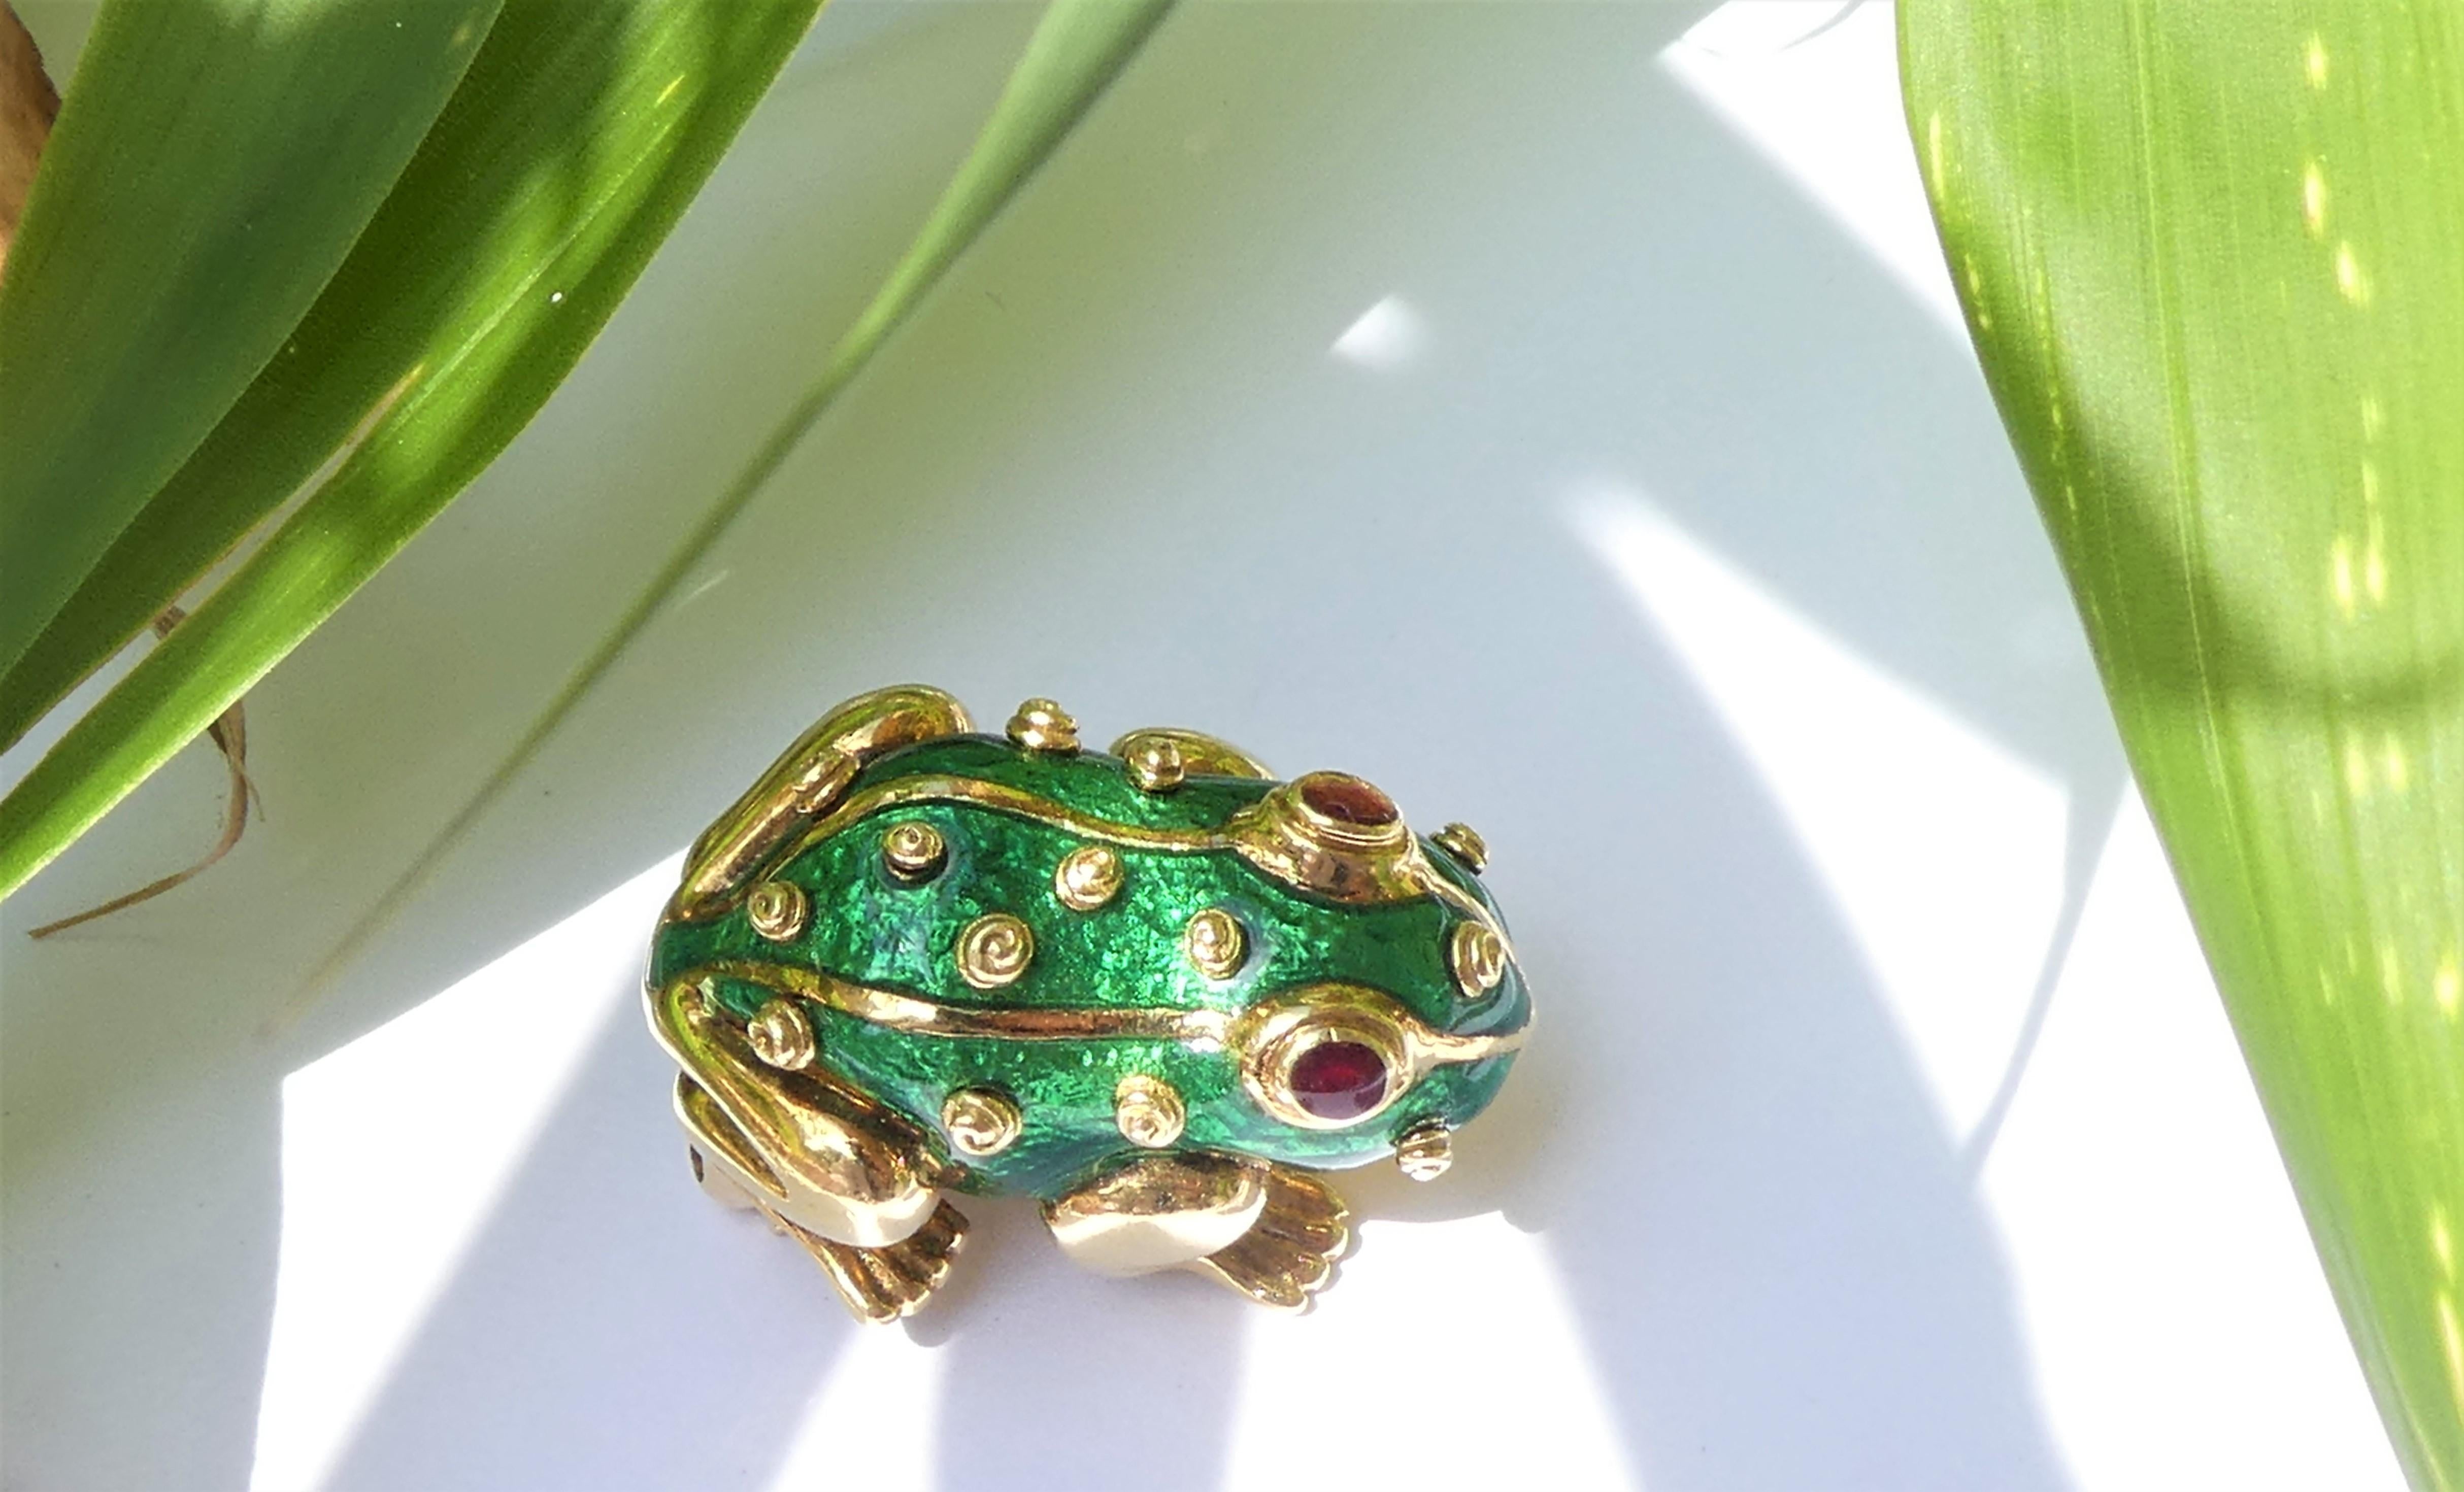 Frog Brooch of the 1970s by David Webb. It is crafted in 18 karat yellow gold with green enamel. The eyes are in red enamel. The brooch is stamped Webb and 18 karat. There are two more stamps: the letters C and R. I particularly like the 14 little